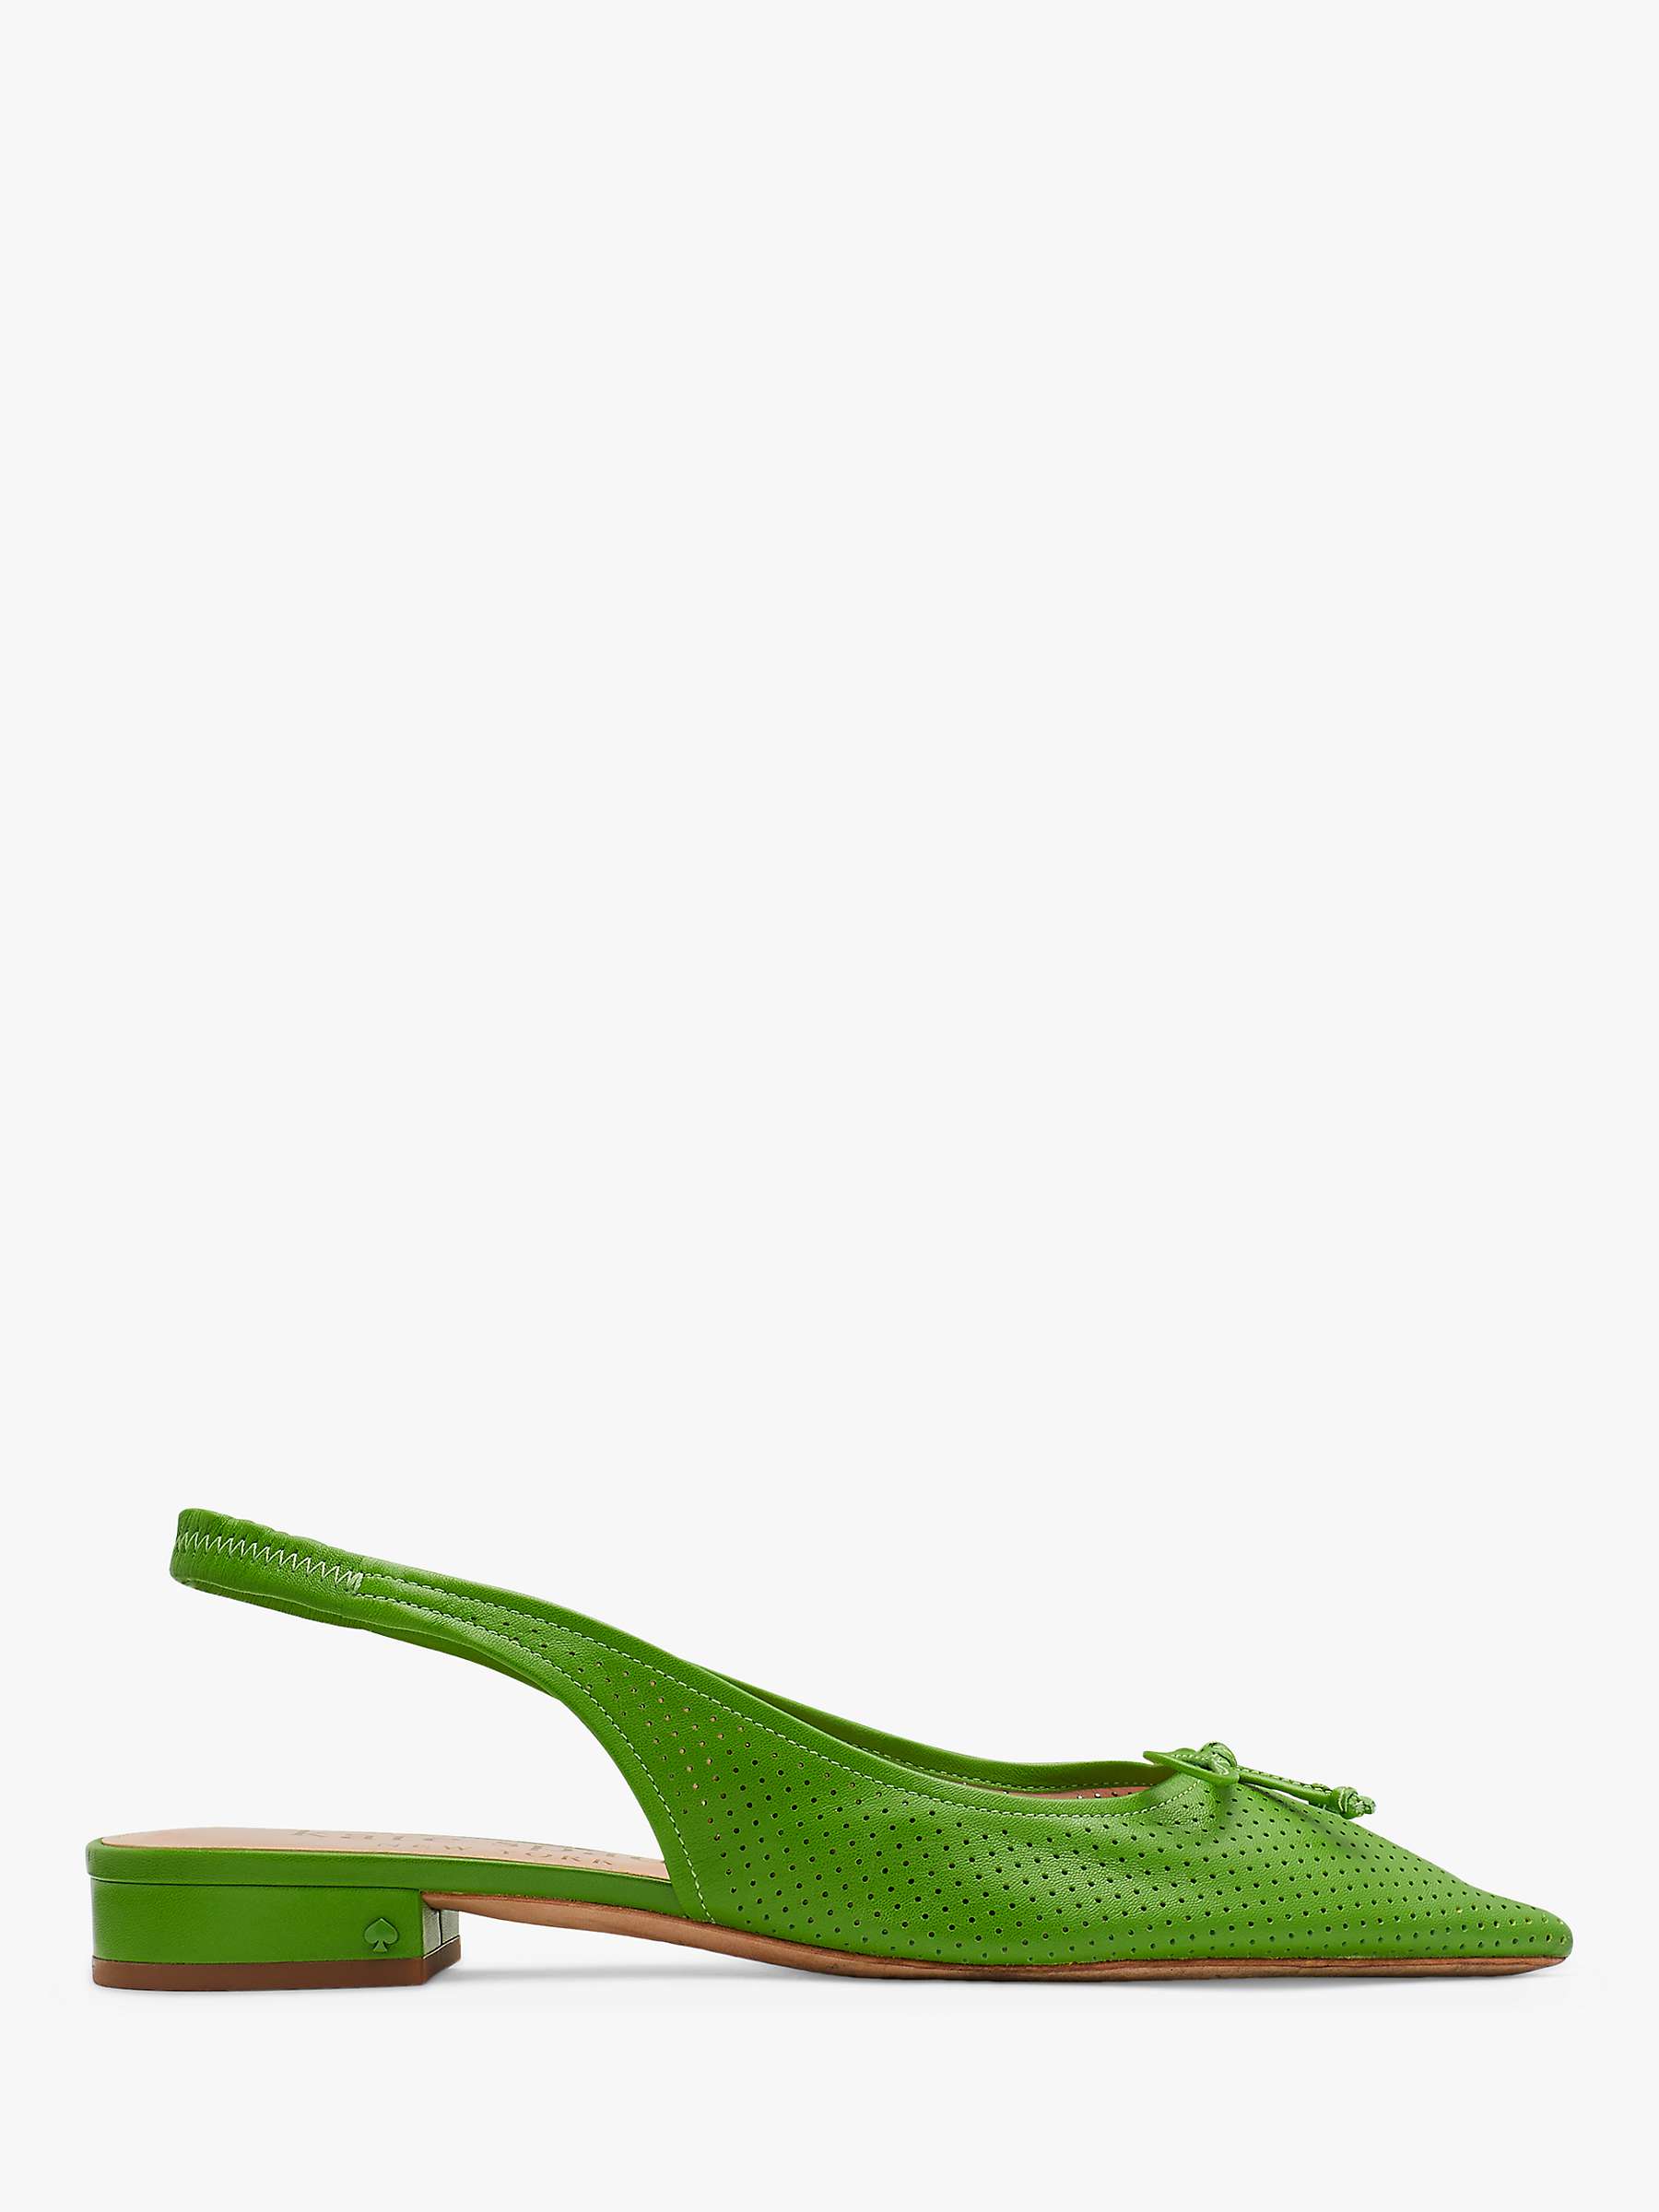 Buy kate spade new york Veronica Perforated Leather Pointed Pumps Online at johnlewis.com